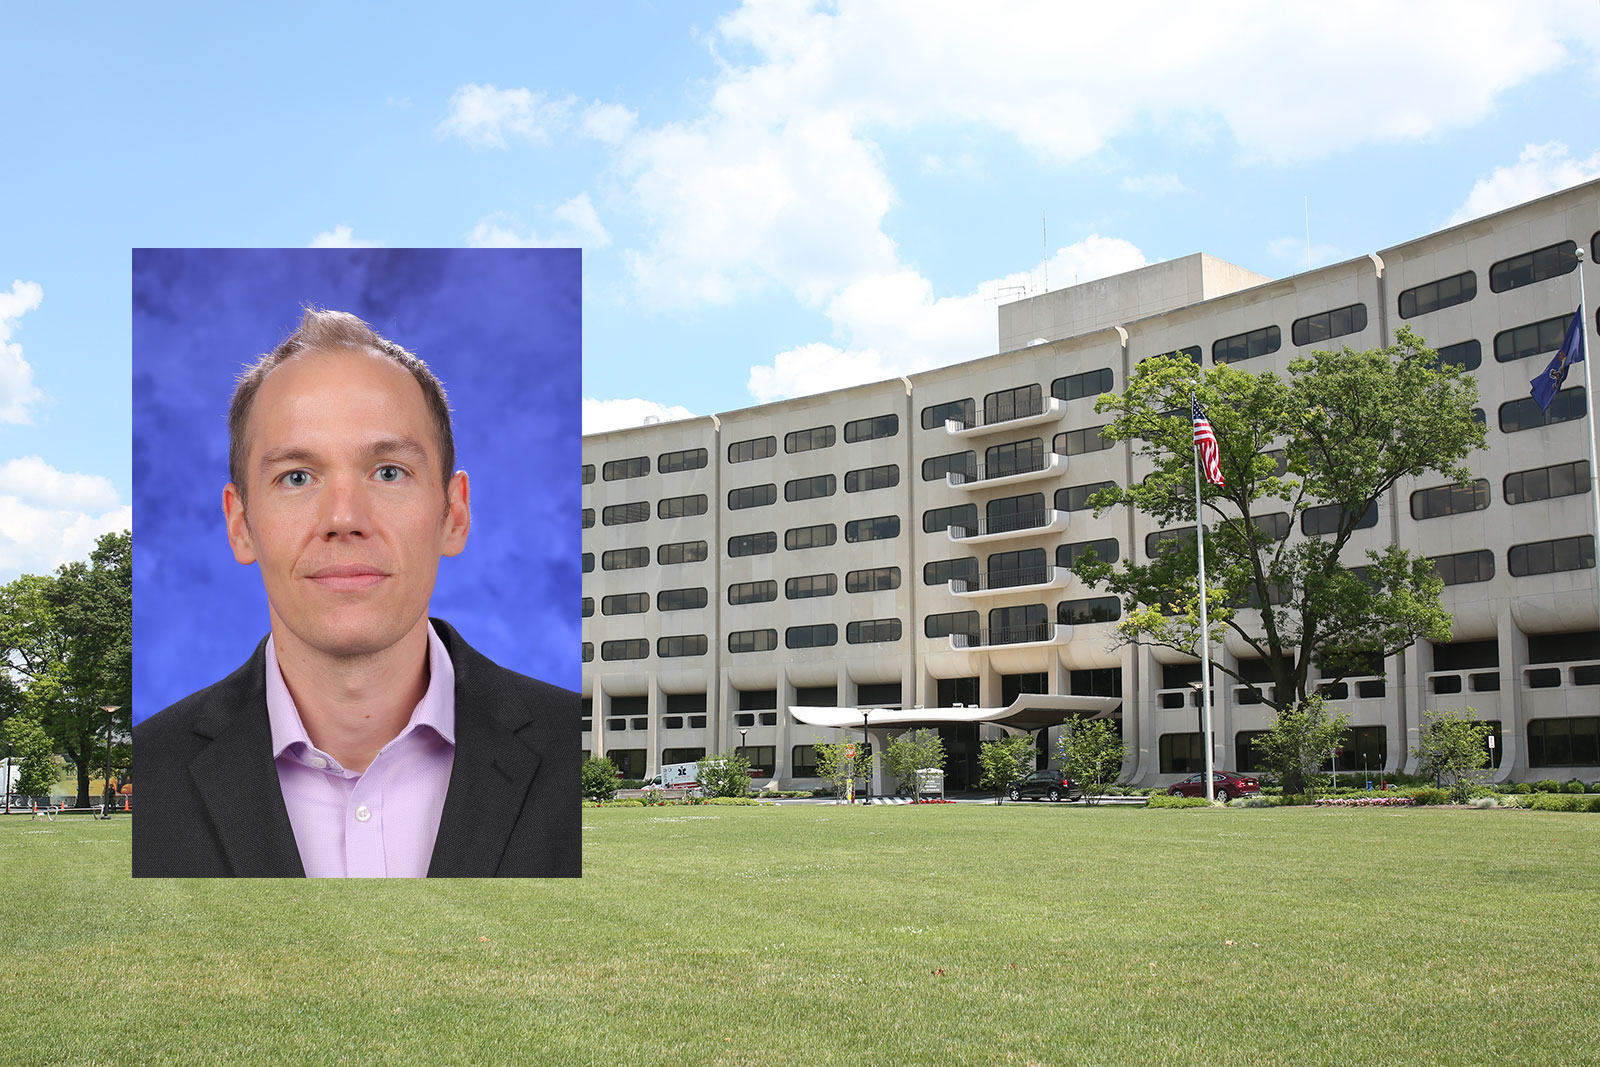 A head-and-shoulders professional photo of Dr. Guy Townsend is seen superimposed on a photo of Penn State College of Medicine's Crescent building in Hershey, PA.